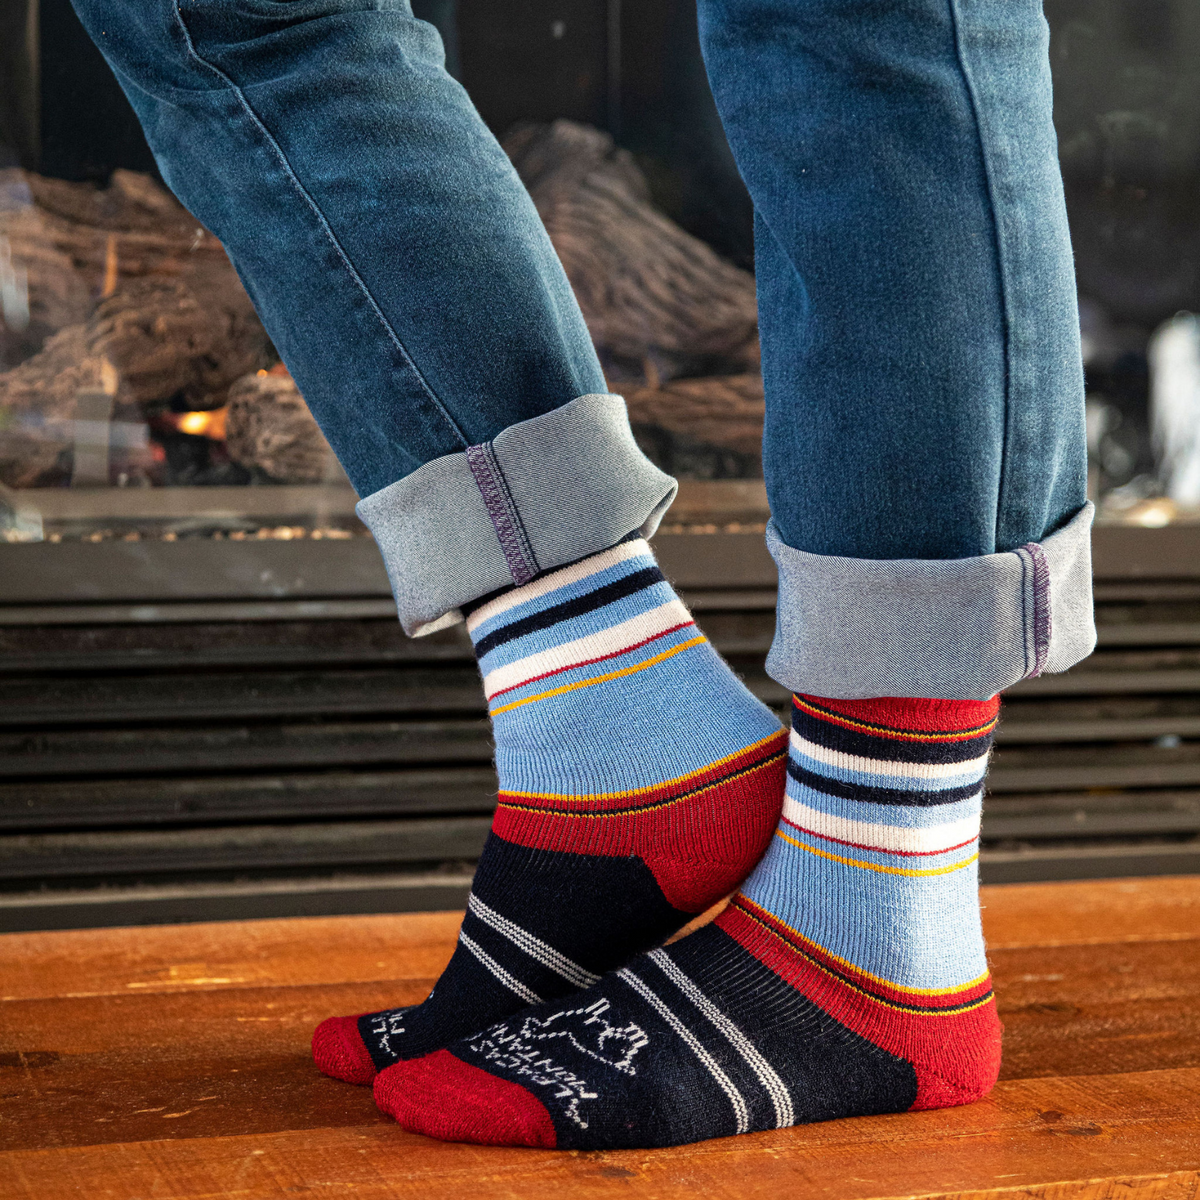 A knees-down photo of a person standing in front of a fireplace wearing blue jeans and a pair of the soft cozy comfortable moisture wicking lounge and active everyday red, black, sky blue, gold, and natural white striped basecamp socks.